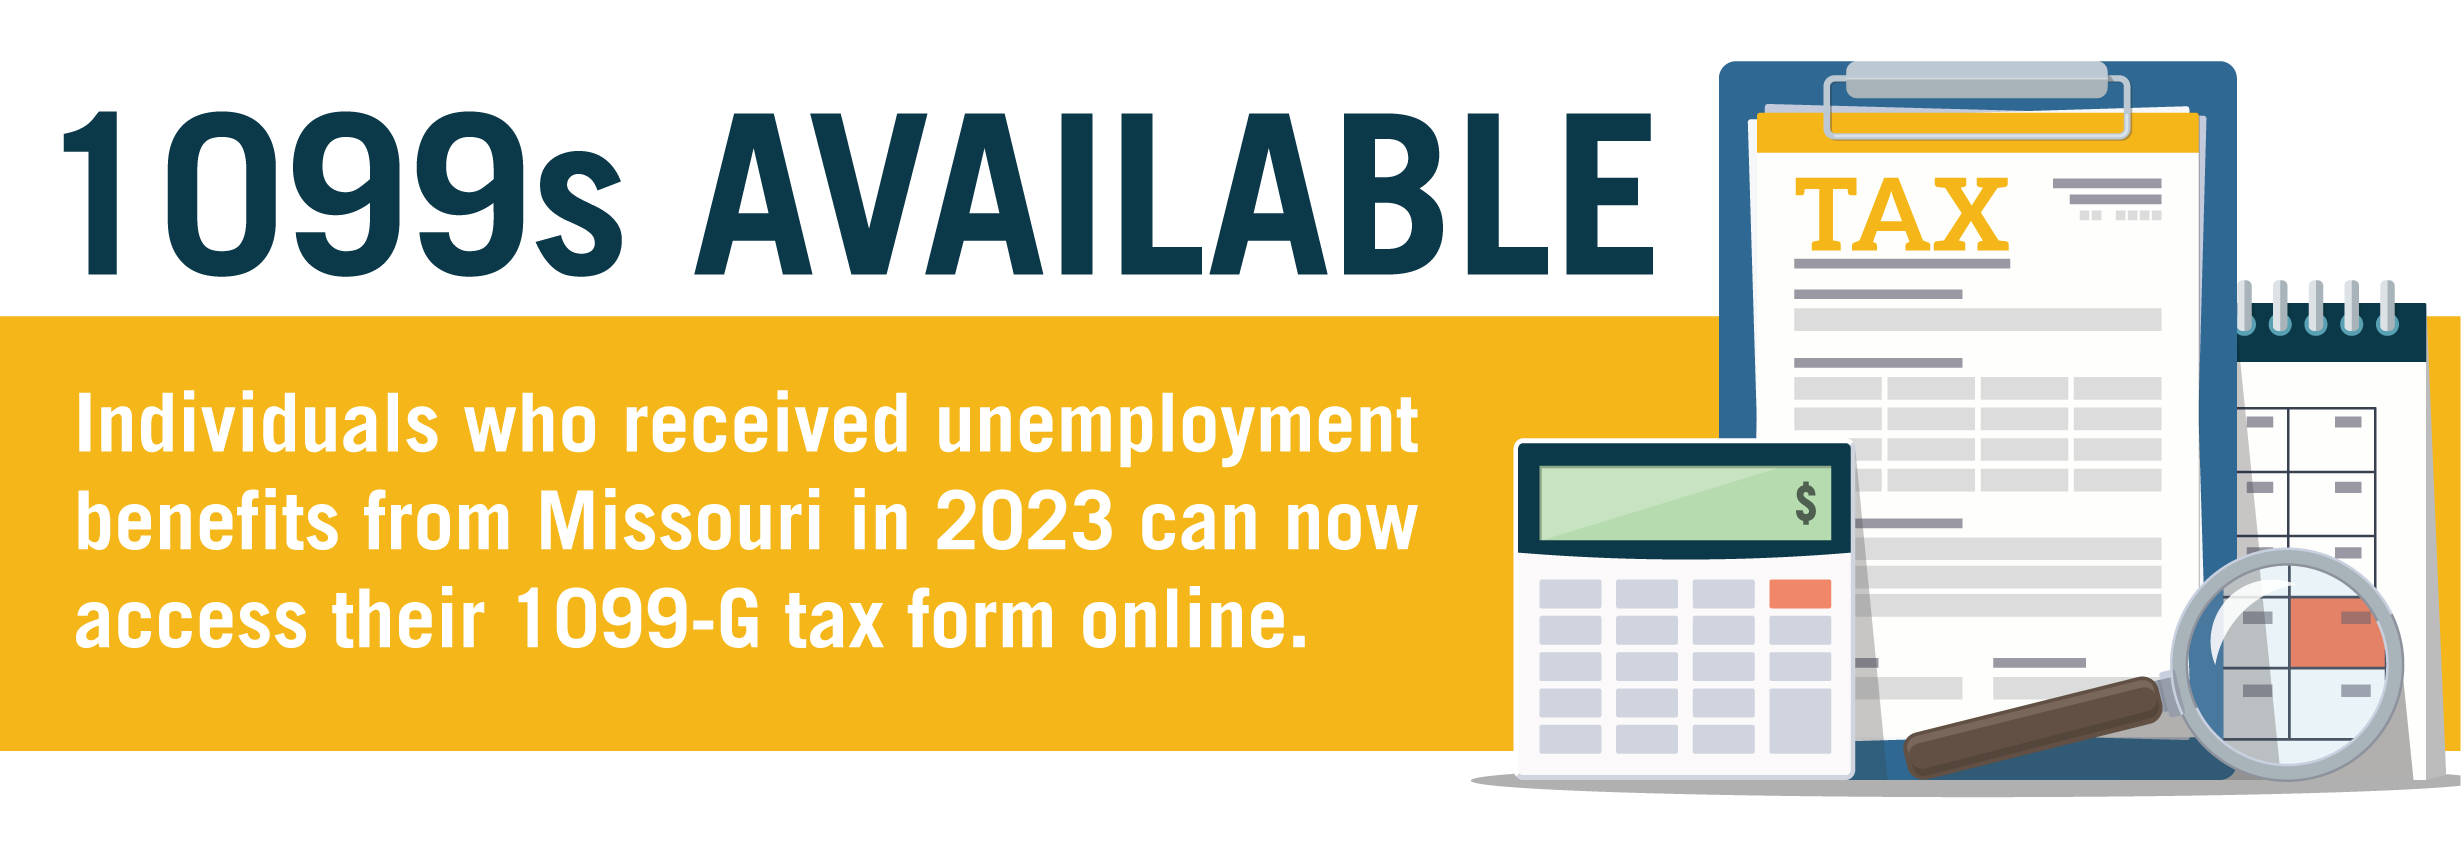 1099s available — Individuals who received unemployment benefits from Missouri in 2023 can now access their 1099-G tax form online